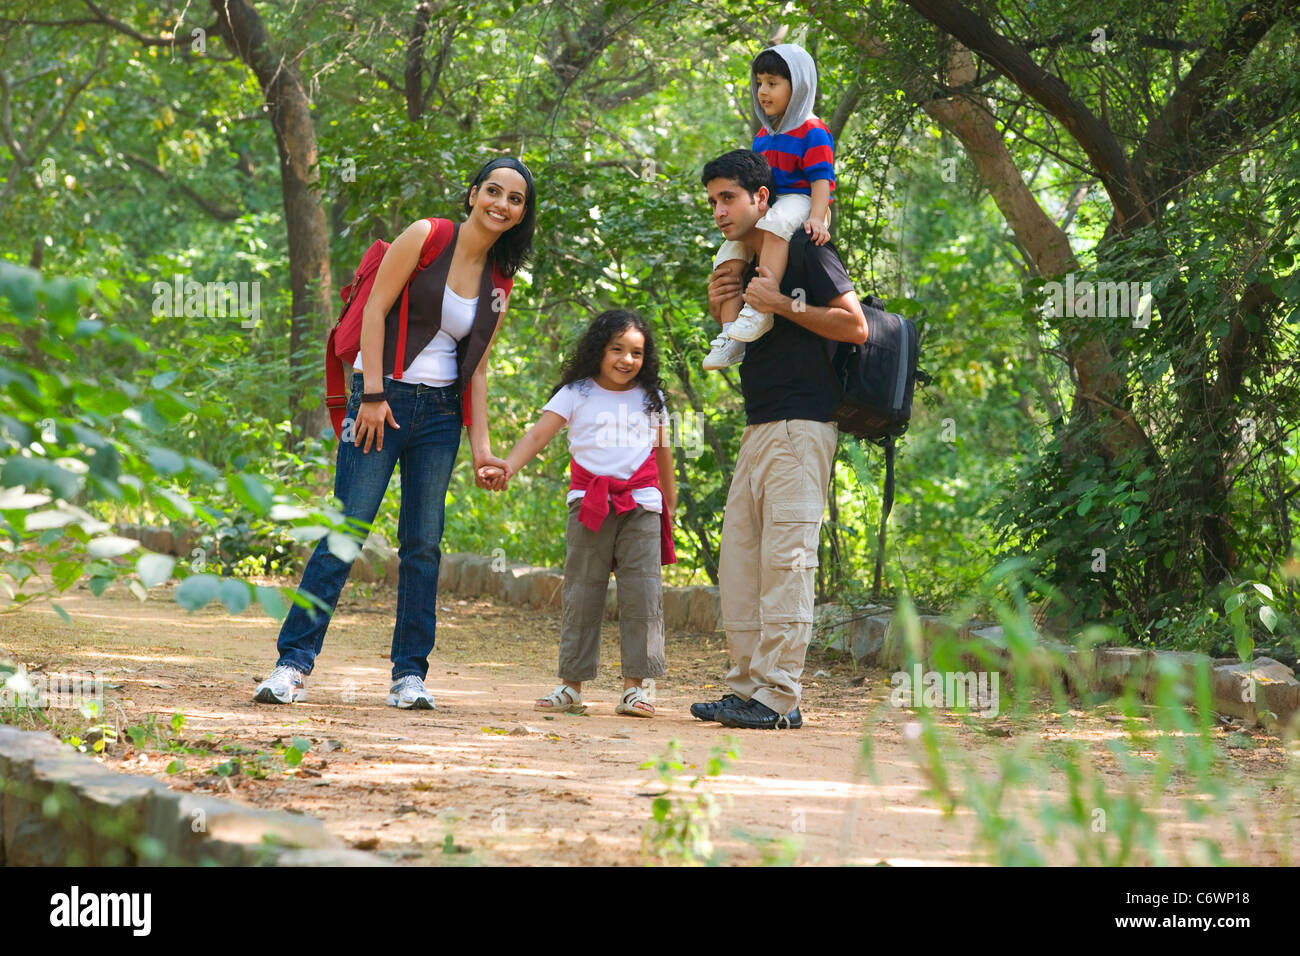 Family in a park Stock Photo